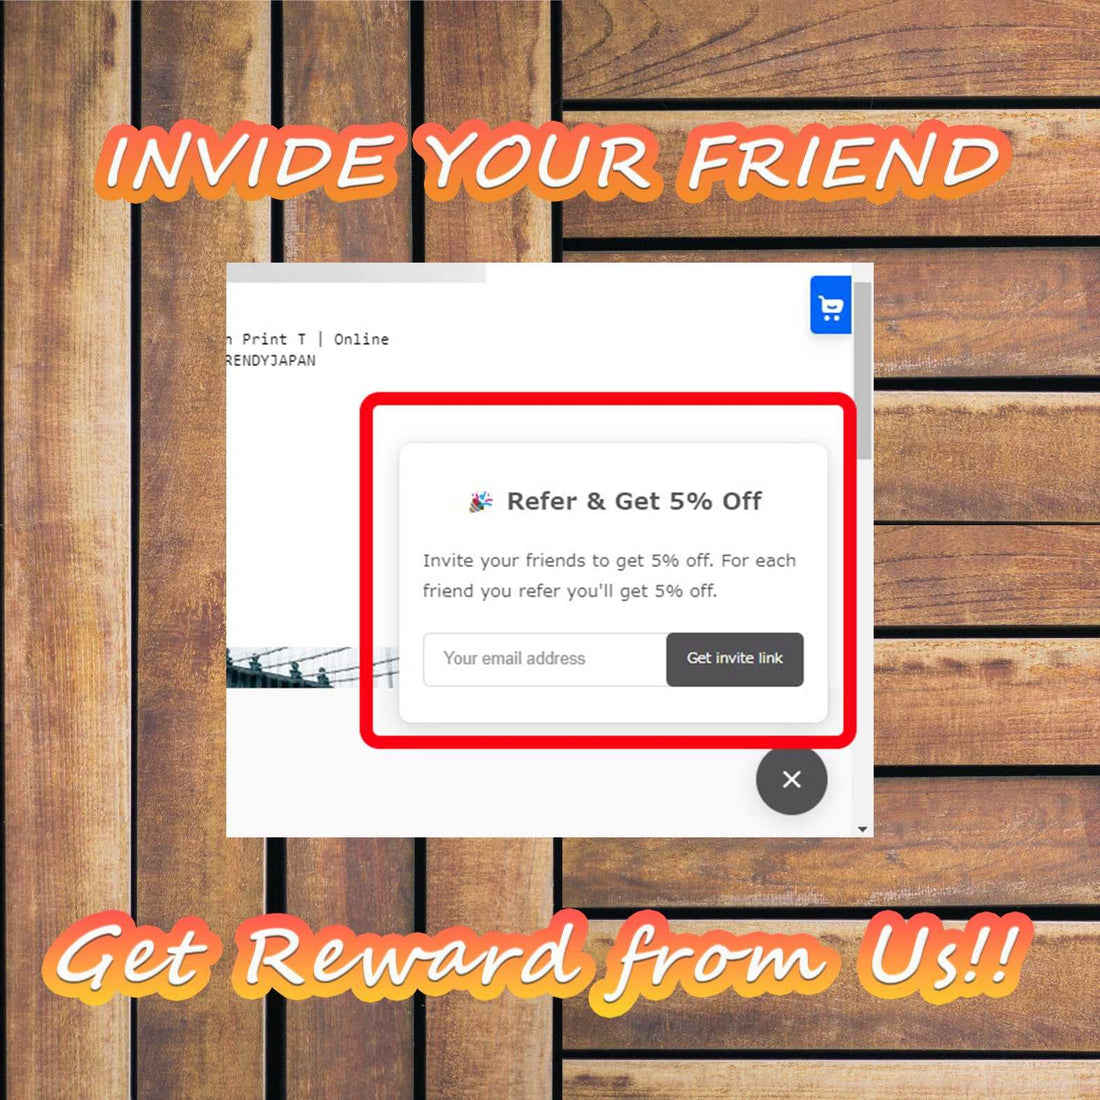 How to Register for Referral Friend Campaign | Online Clothing Shop